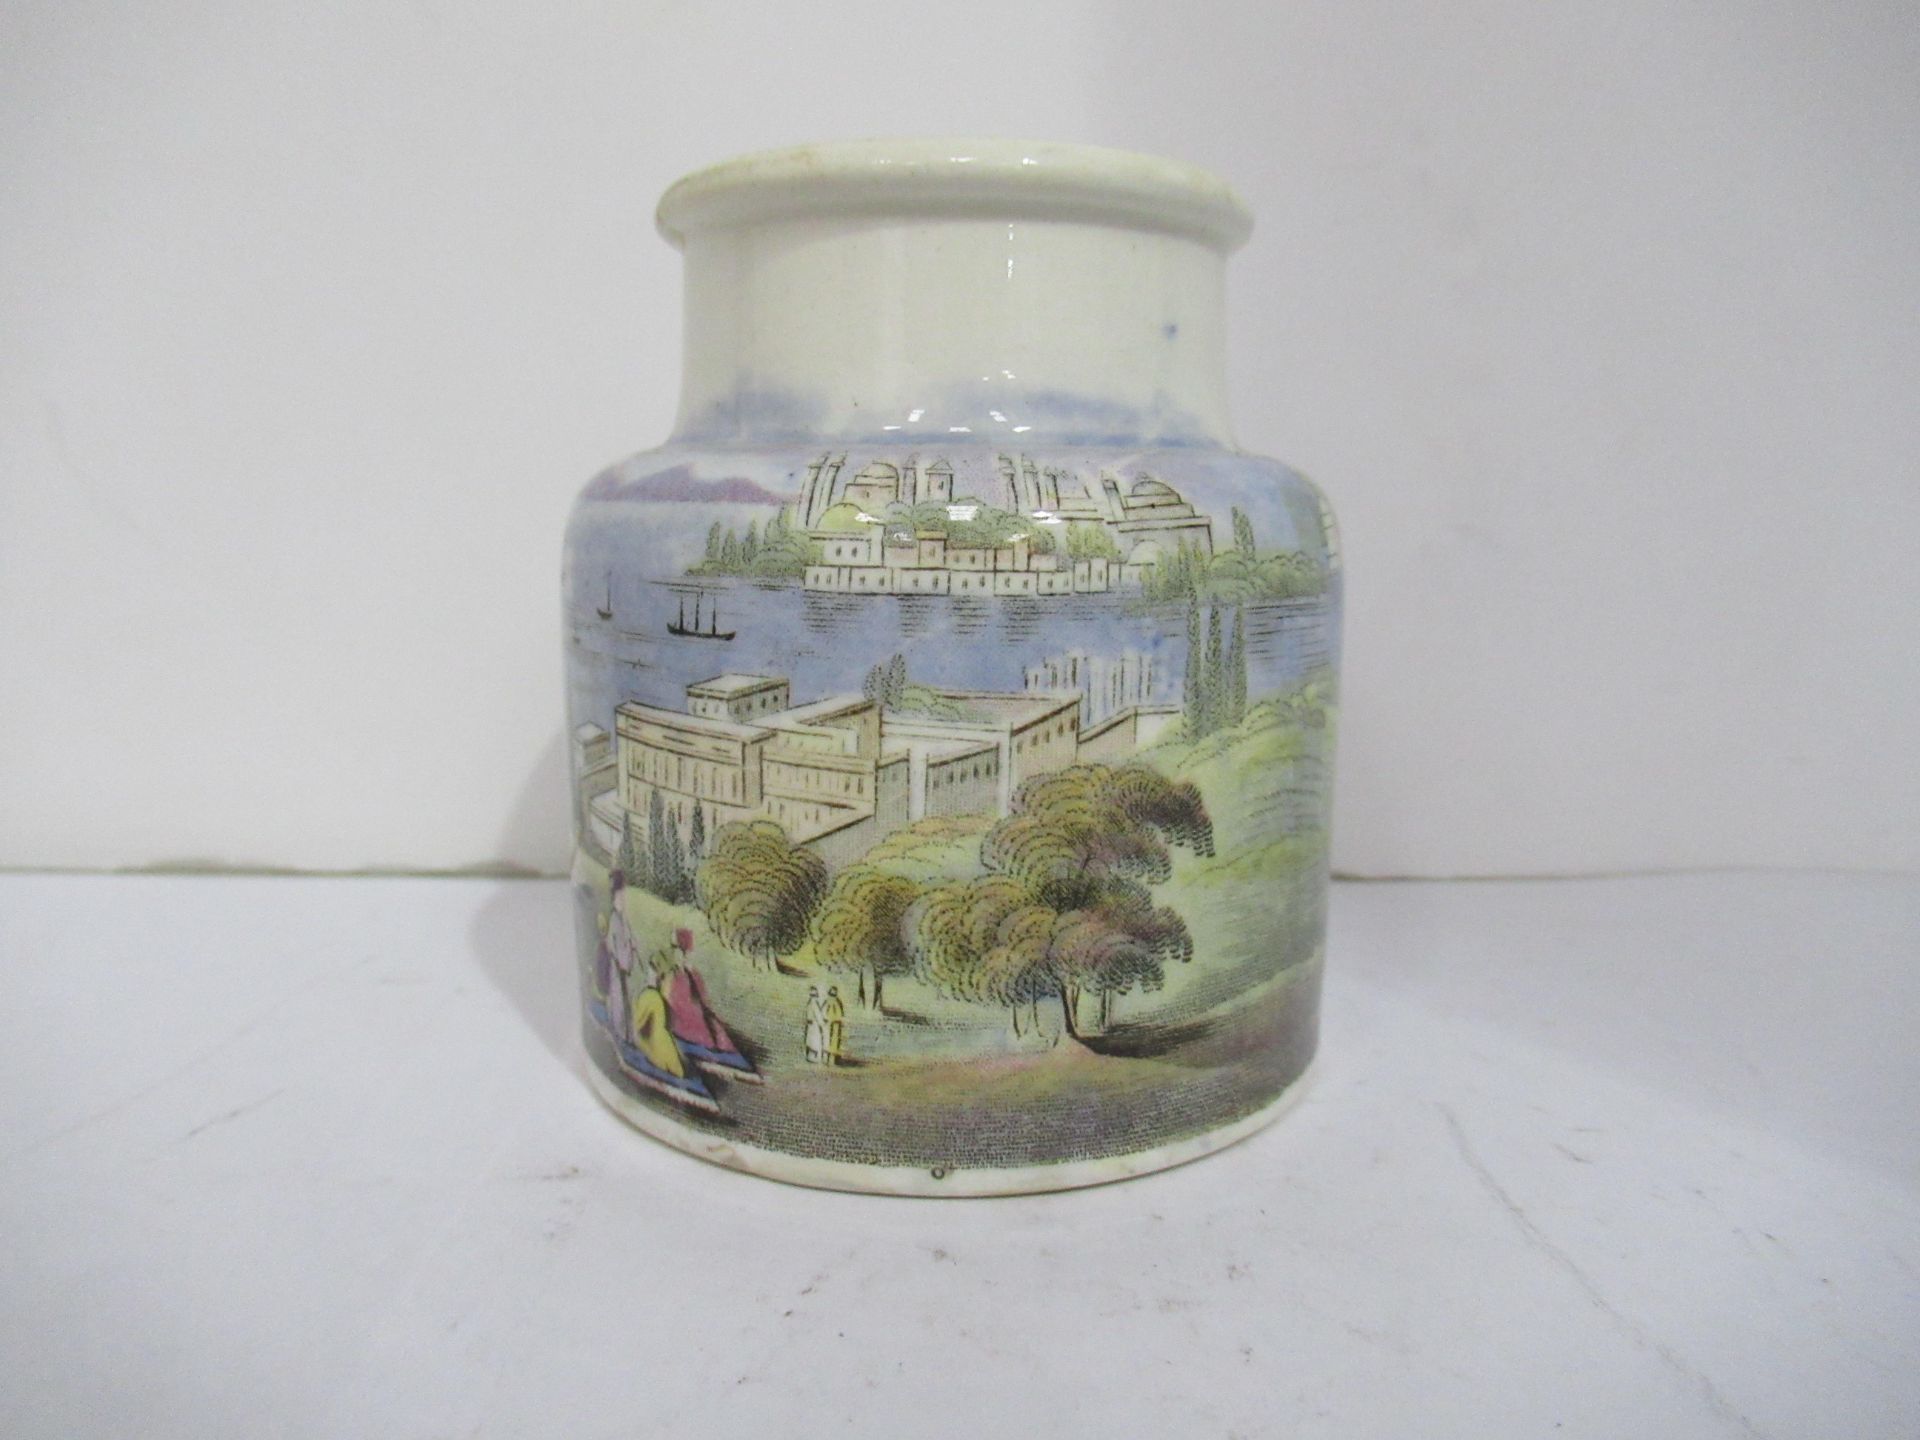 6x Prattware painted jars including one depicting Venice - Image 2 of 42